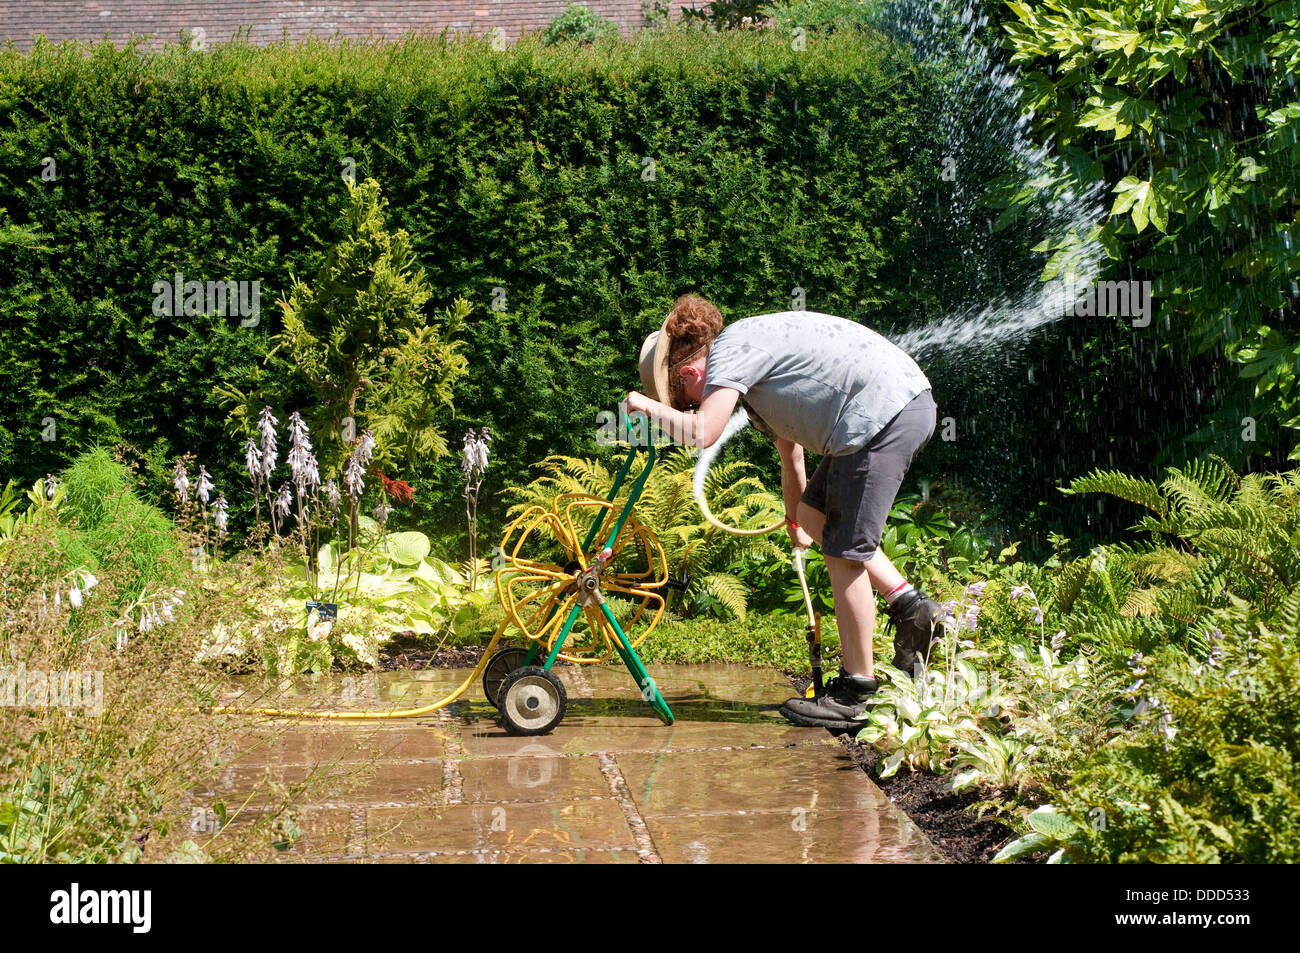 Gardener trying to sort out the hose of water squirting everywhere Stock Photo